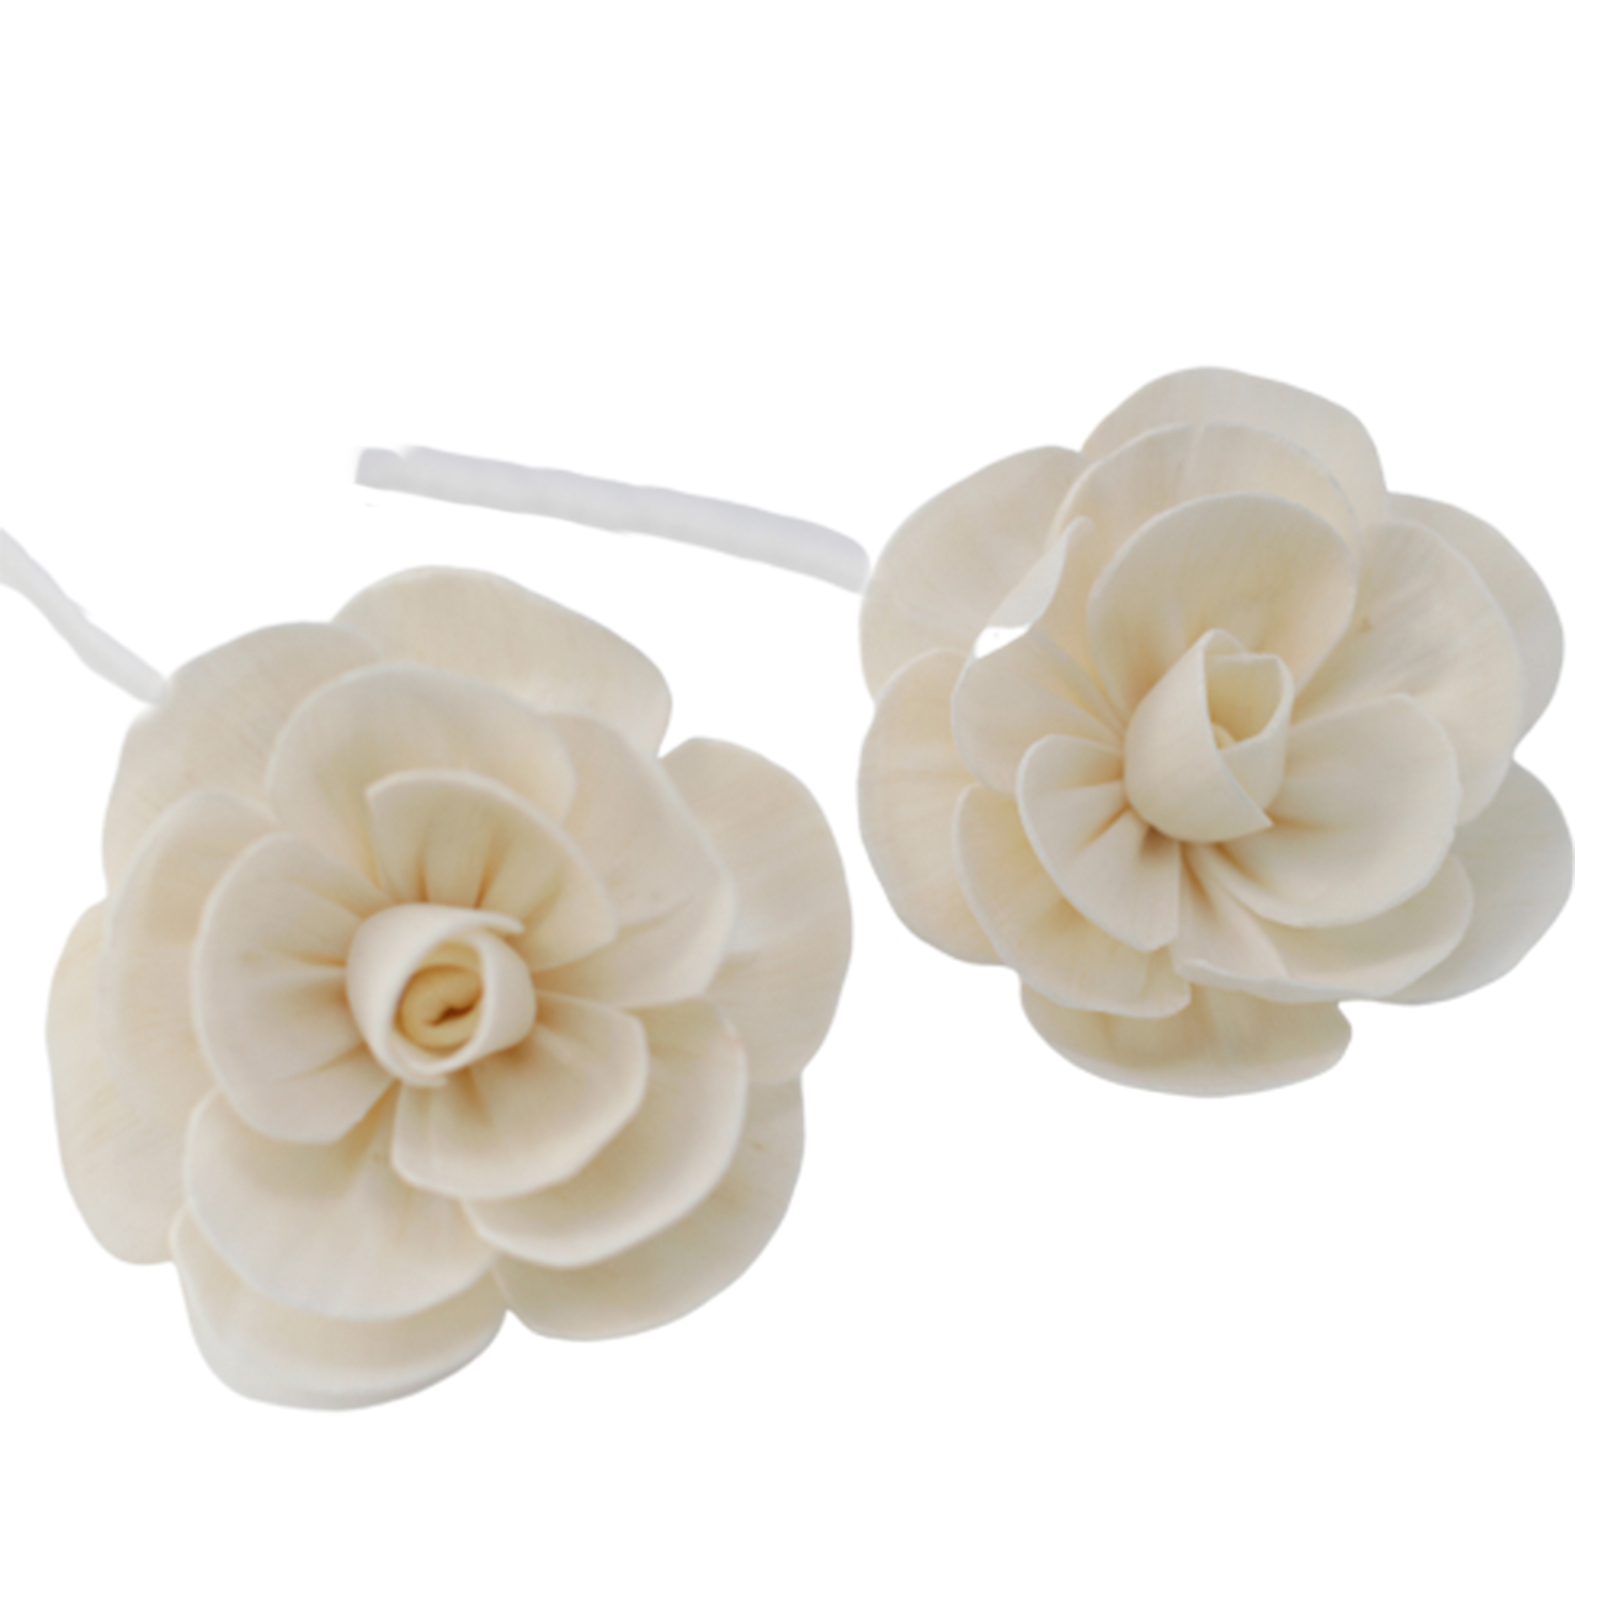 12 x Natural Diffuser Flowers - Large Lotus on String